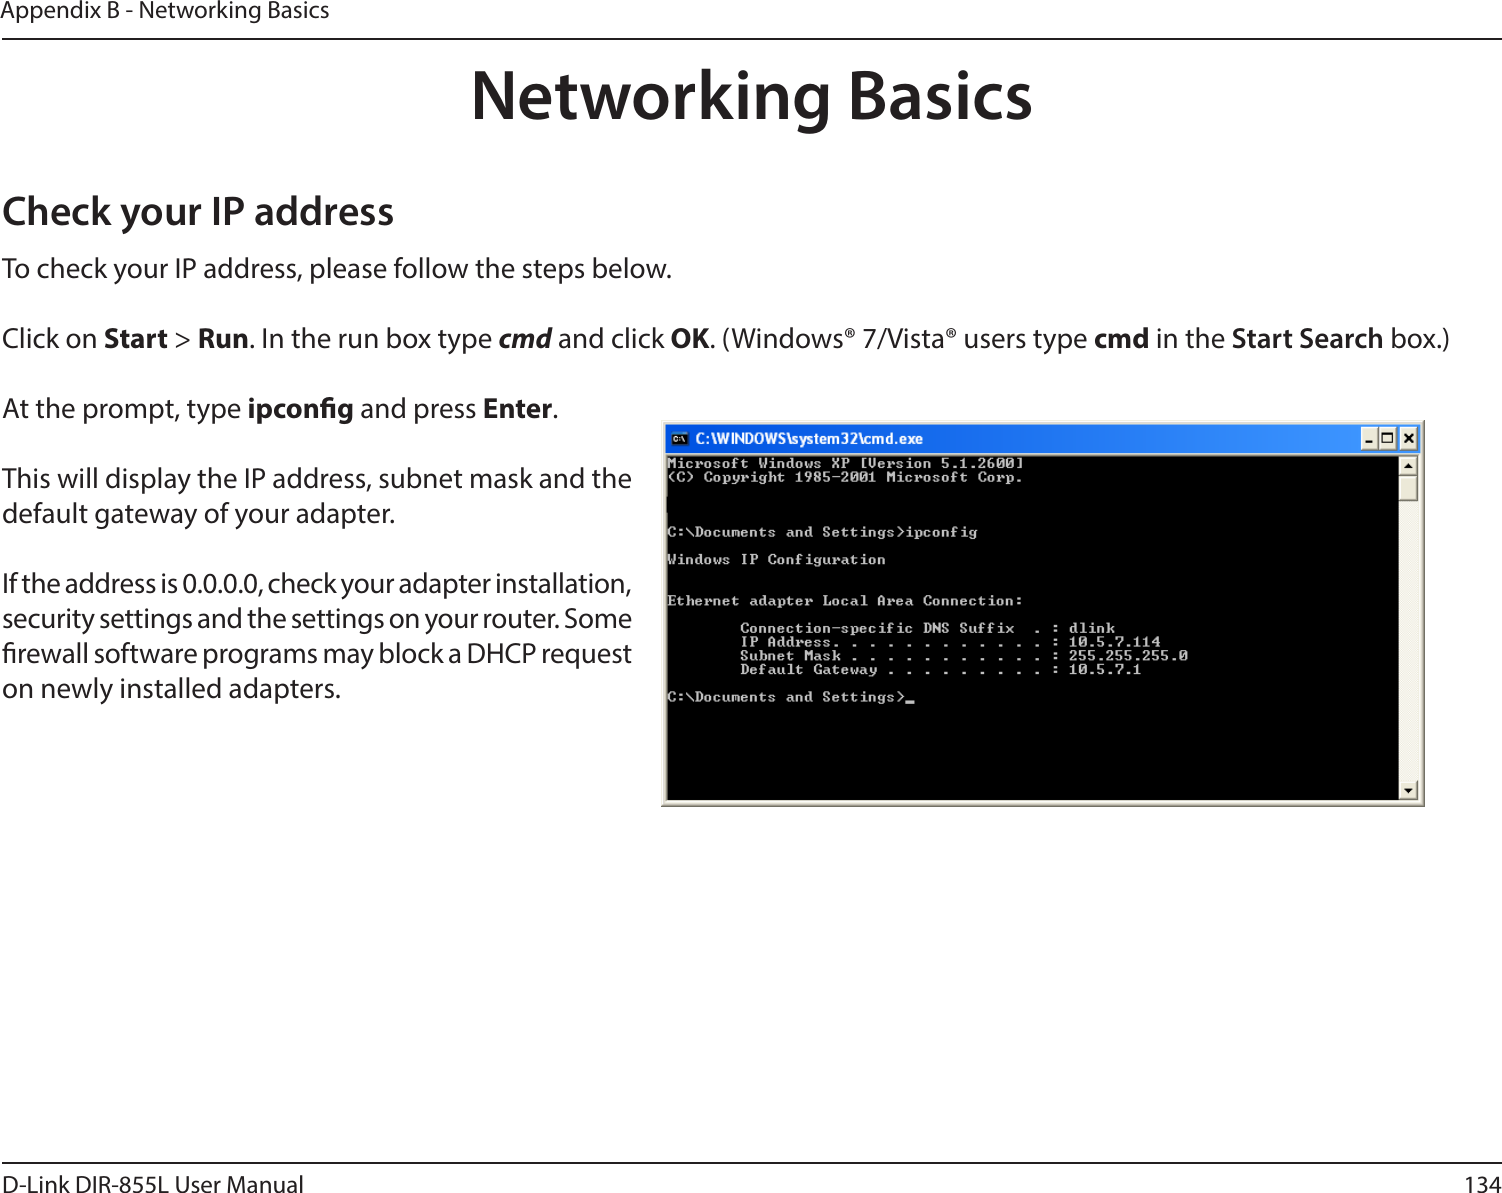 134D-Link DIR-855L User ManualAppendix B - Networking BasicsNetworking BasicsCheck your IP addressTo check your IP address, please follow the steps below.Click on Start &gt; Run. In the run box type cmd and click OK. (Windows® 7/Vista® users type cmd in the Start Search box.)At the prompt, type ipcong and press Enter.This will display the IP address, subnet mask and the default gateway of your adapter.If the address is 0.0.0.0, check your adapter installation, security settings and the settings on your router. Some rewall software programs may block a DHCP request on newly installed adapters. 